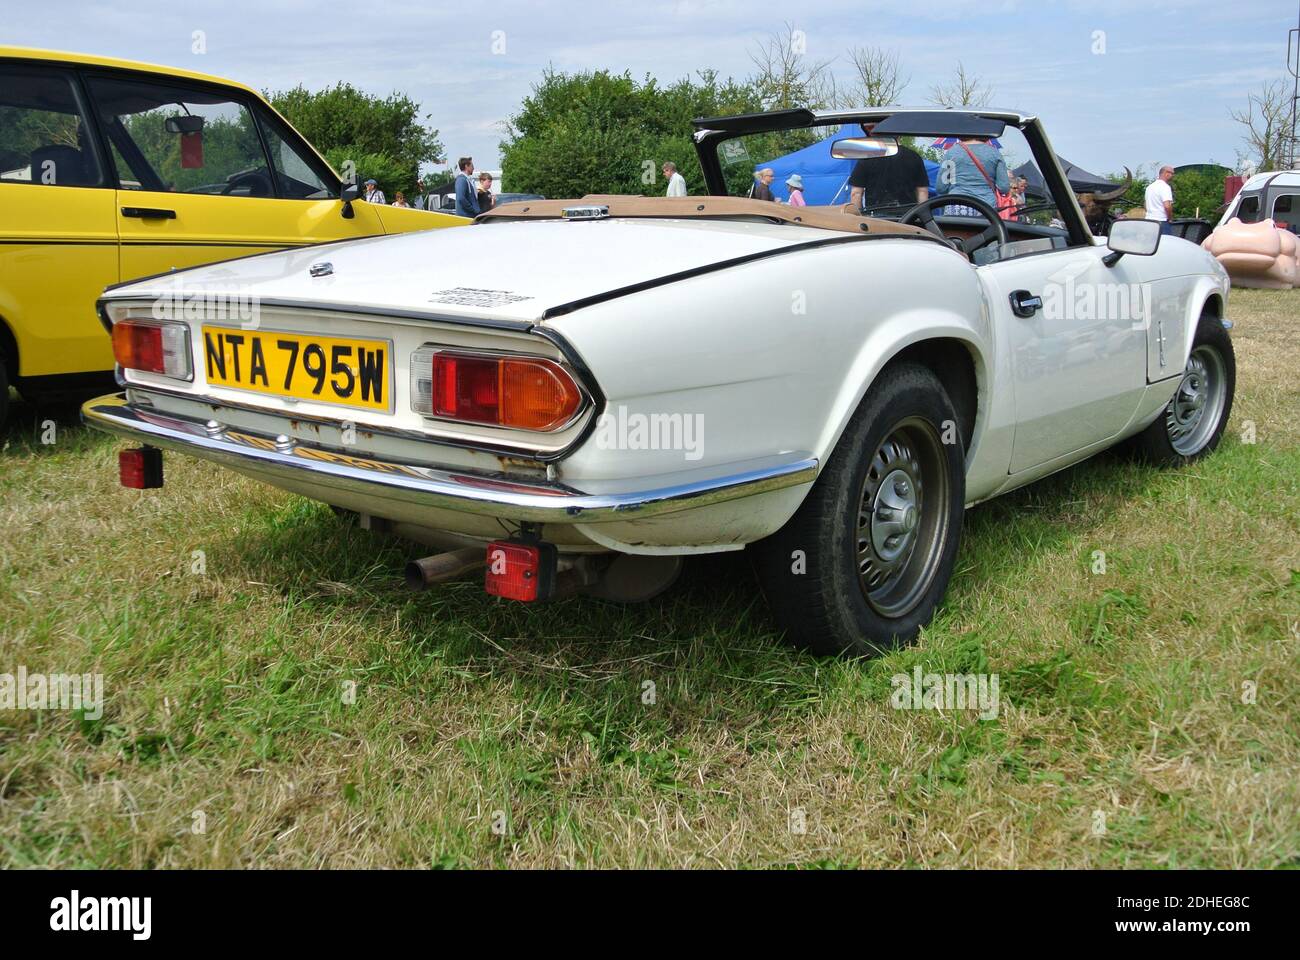 A 1981 Triumph Spitfire classic car parked up on display at the Torbay Steam Fair, Churston, Devon, England, UK. Stock Photo